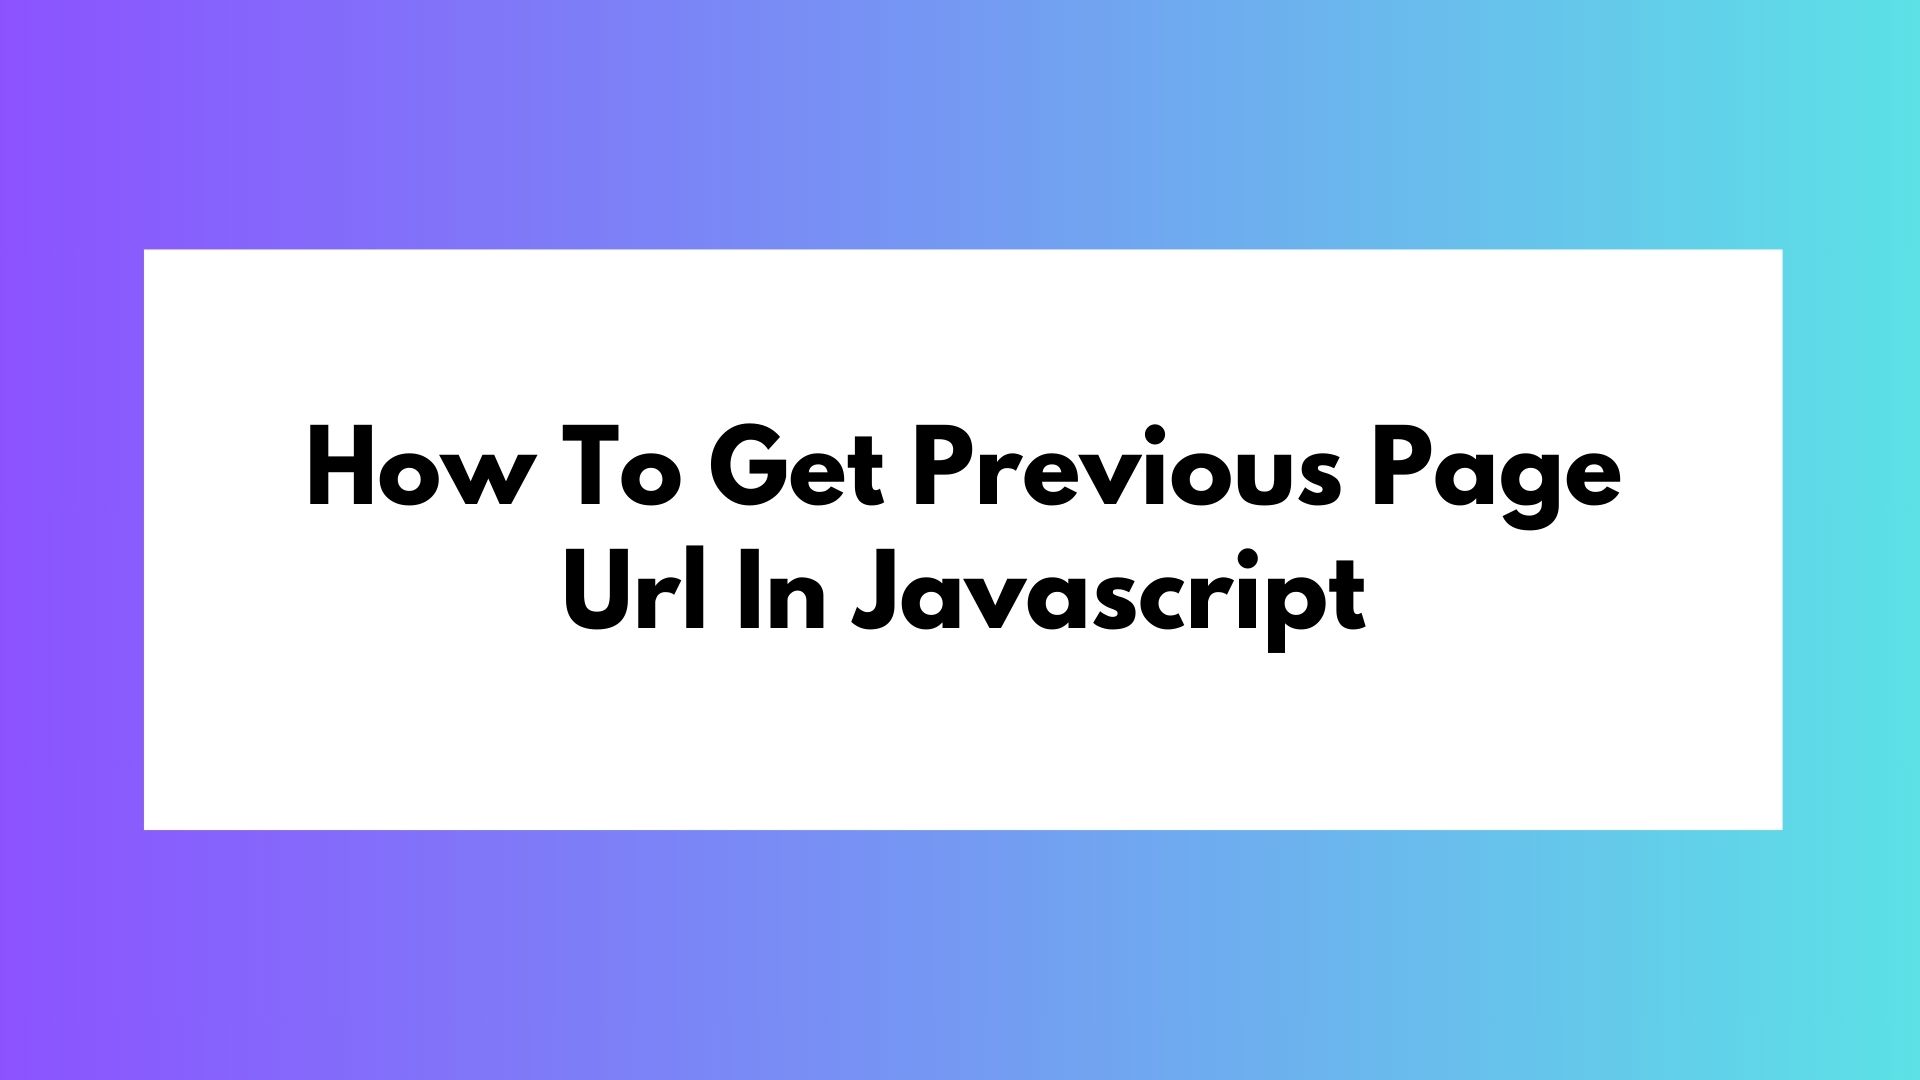 How To Get Previous Page Url In Javascript